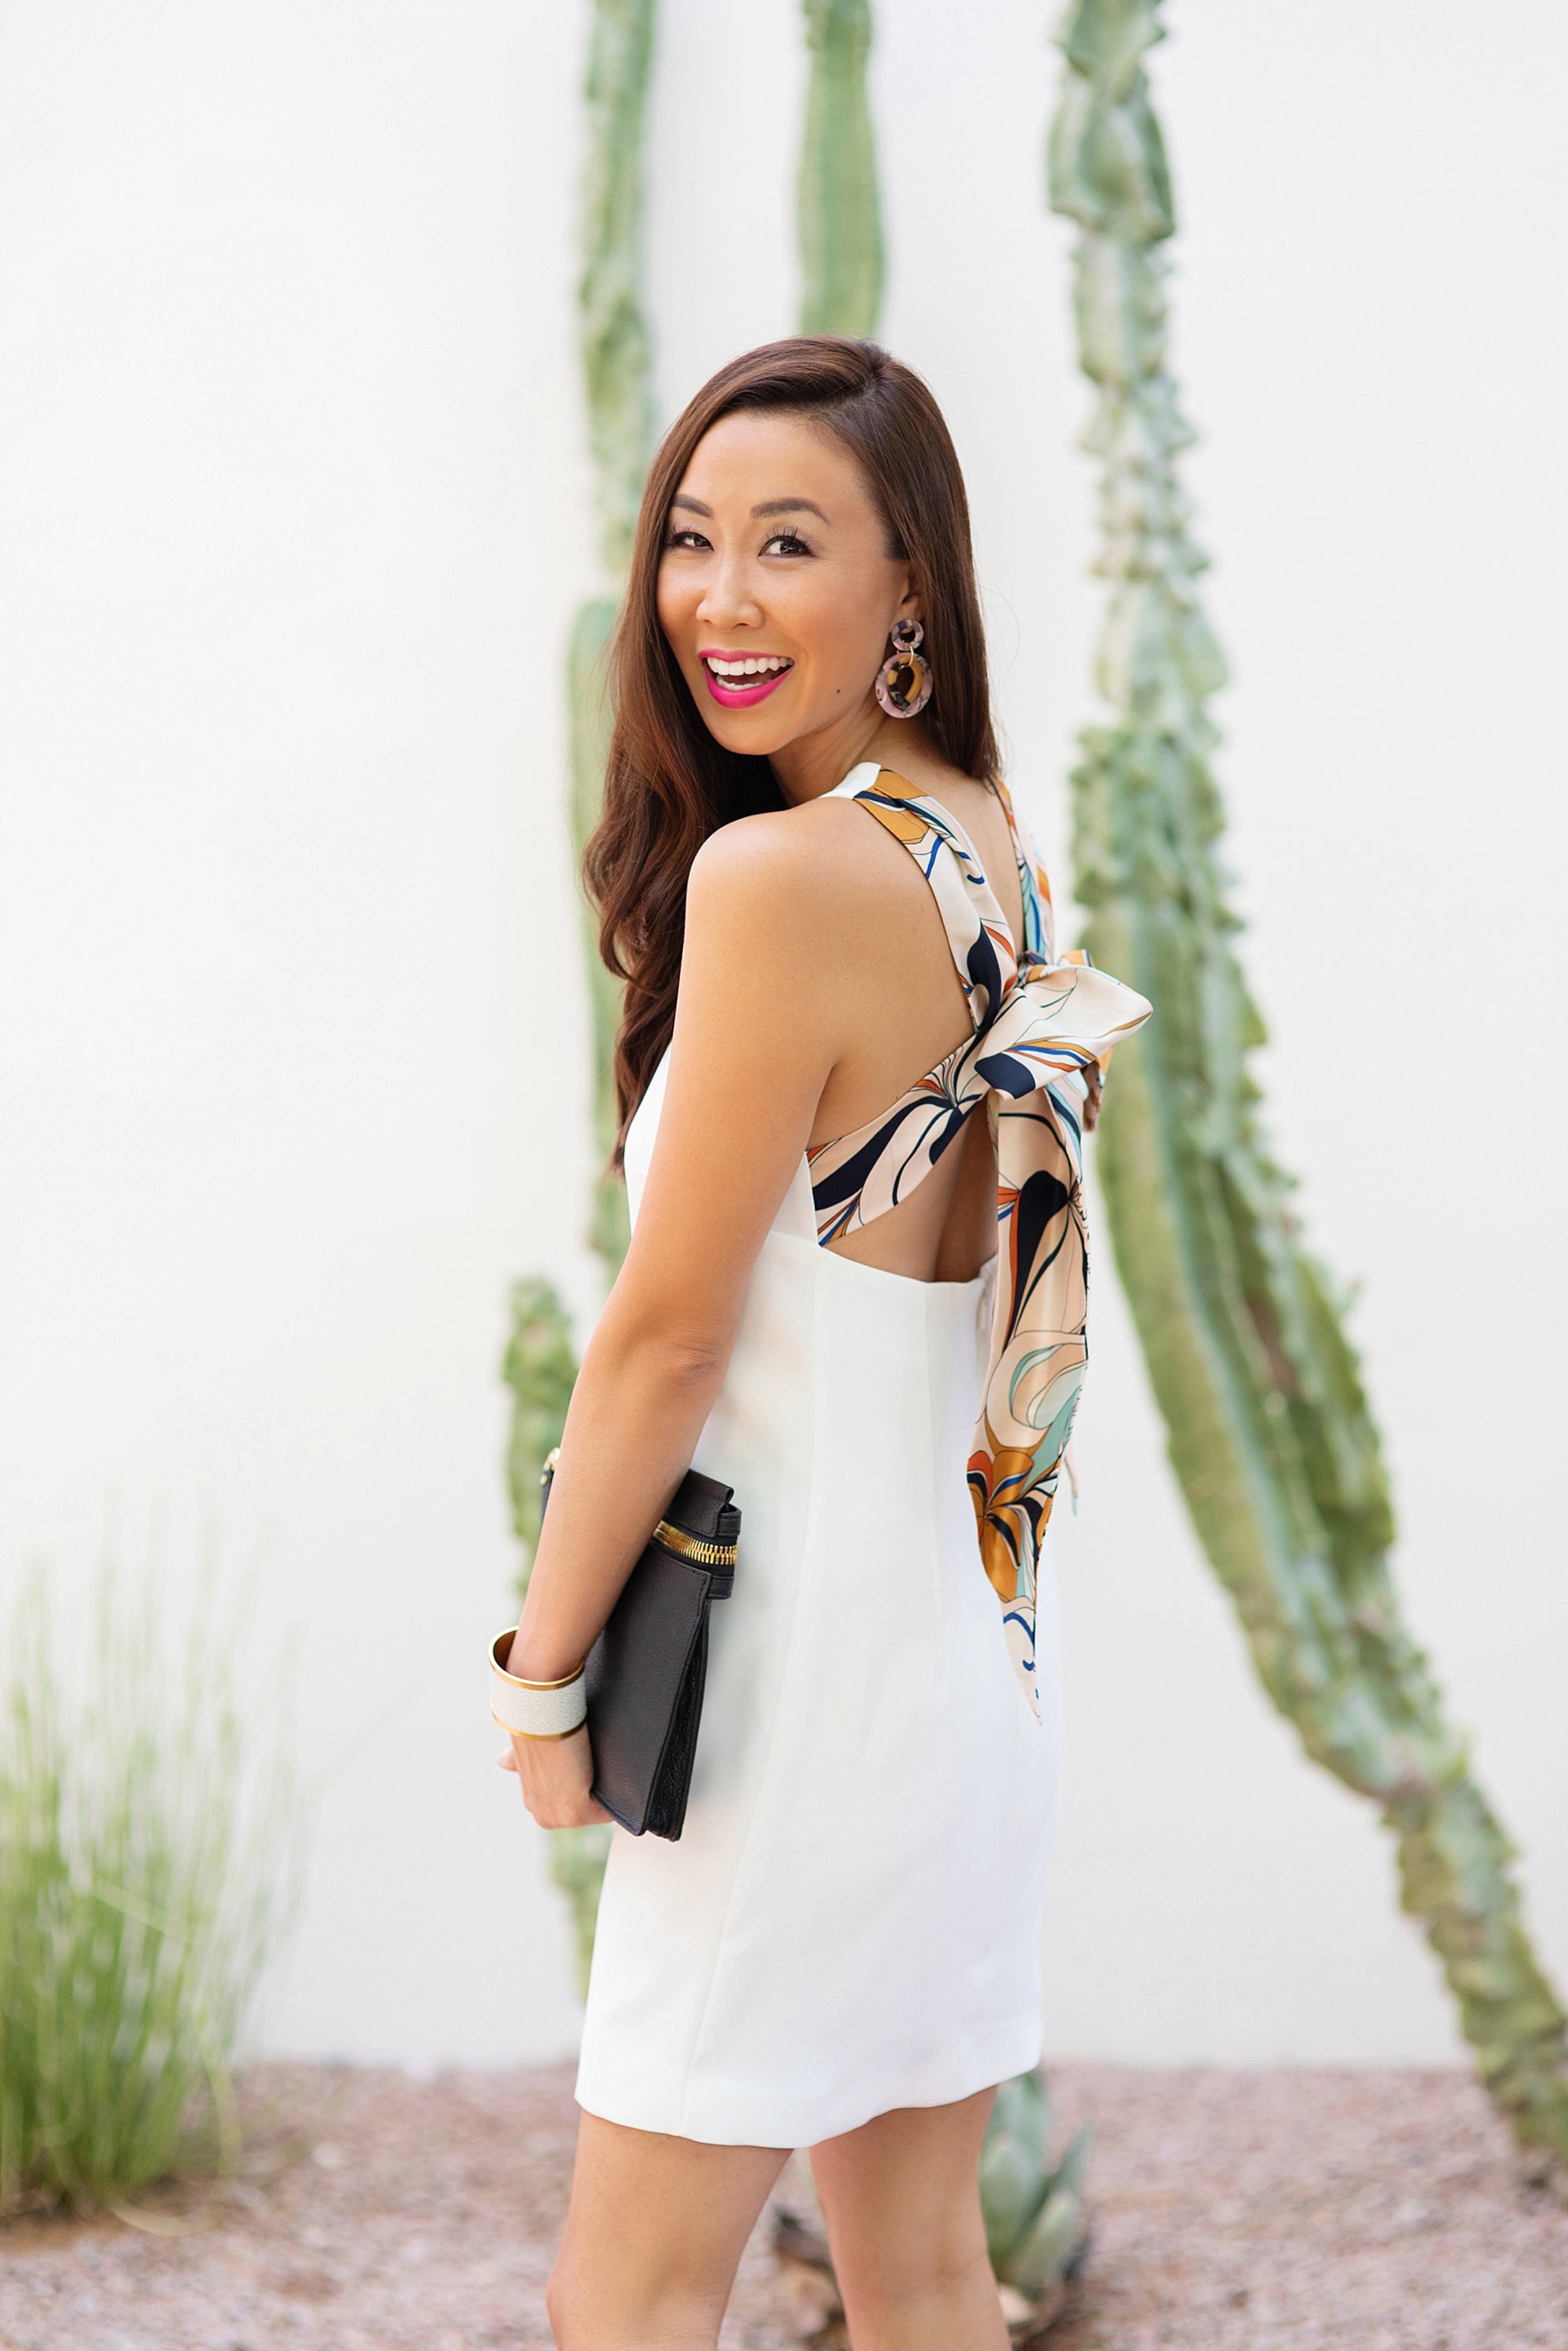 Mango Gugi2 scarf dress on blogger Diana Elizabeth in Phoenix, Arizona. Scarf dress paired a black clutch by India Hicks and white leather brass cuff